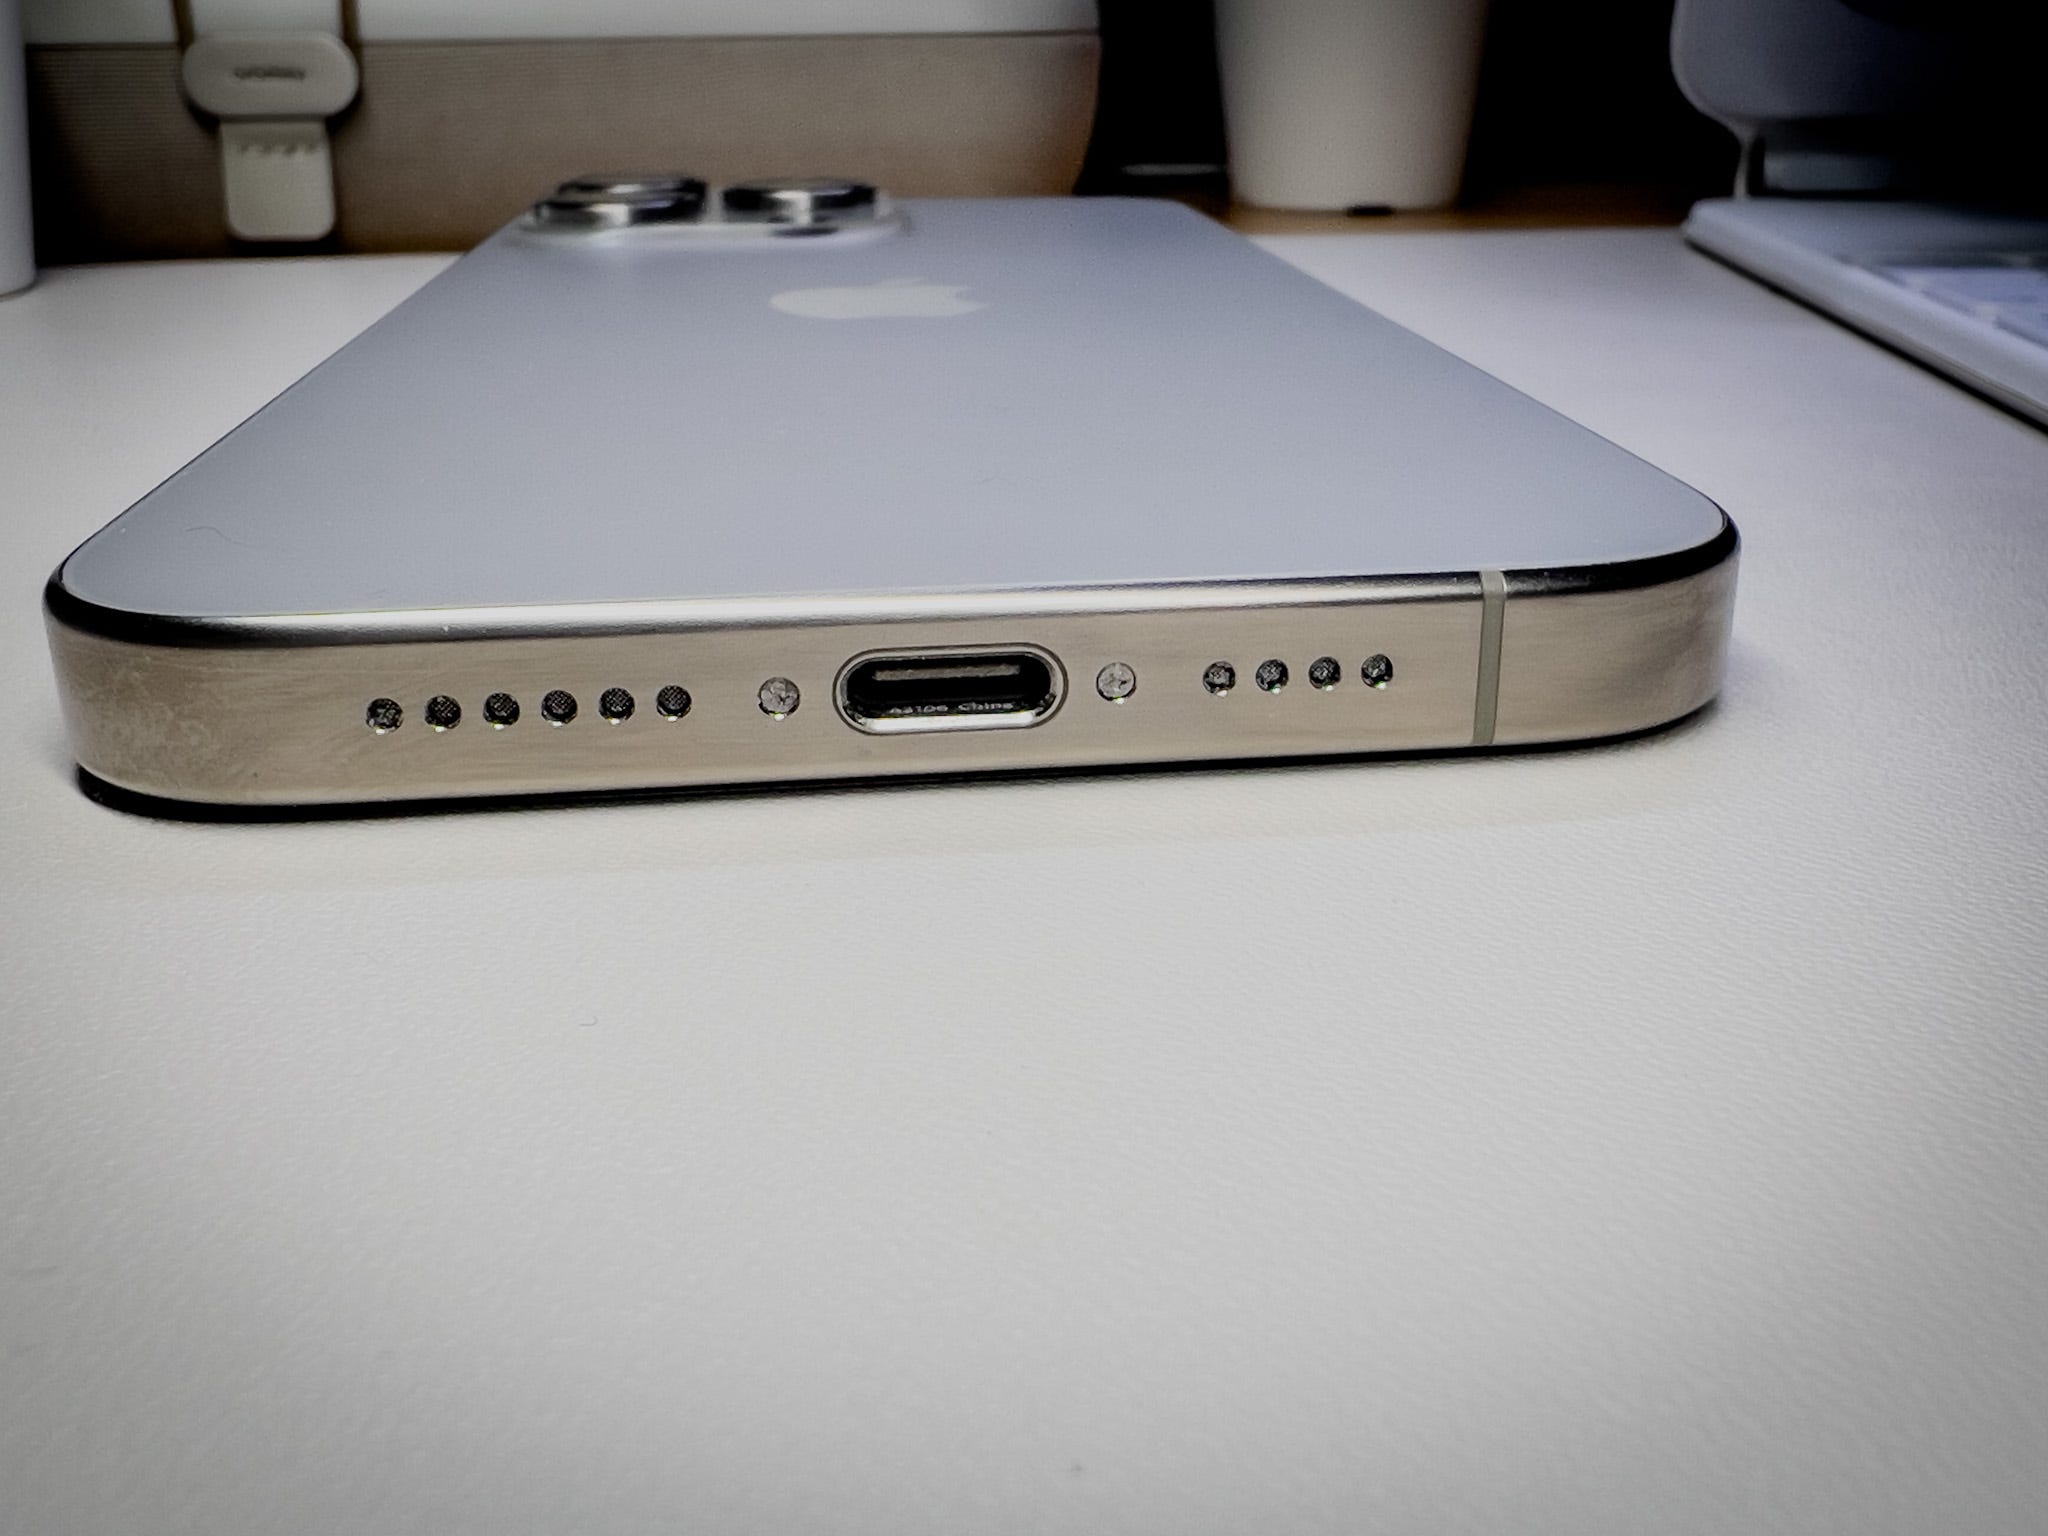 We can finally build a full-on USB-C Apple ecosystem, by Tobias Hedtke